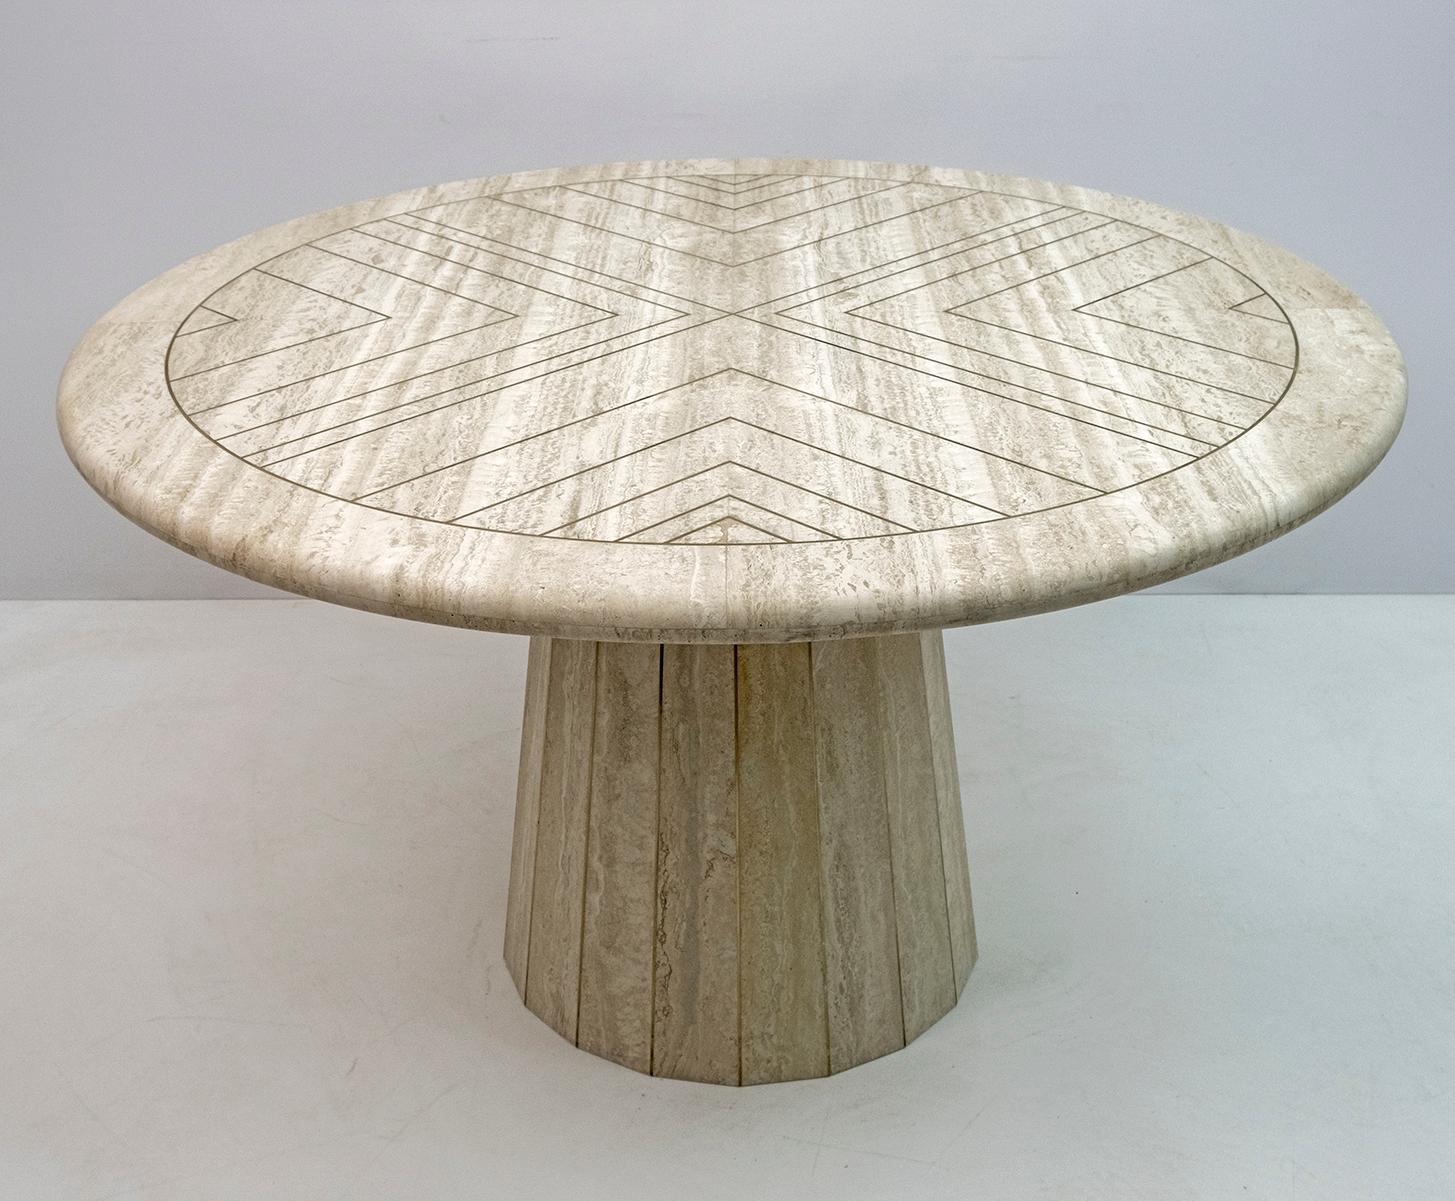 Rare and absolutely fantastic dining table by Willy Rizzo. The table has a fantastic solid brass arrow pattern built into the travertine. The inlay also runs at the base of the table.
The top has a thickness of 4 cm.